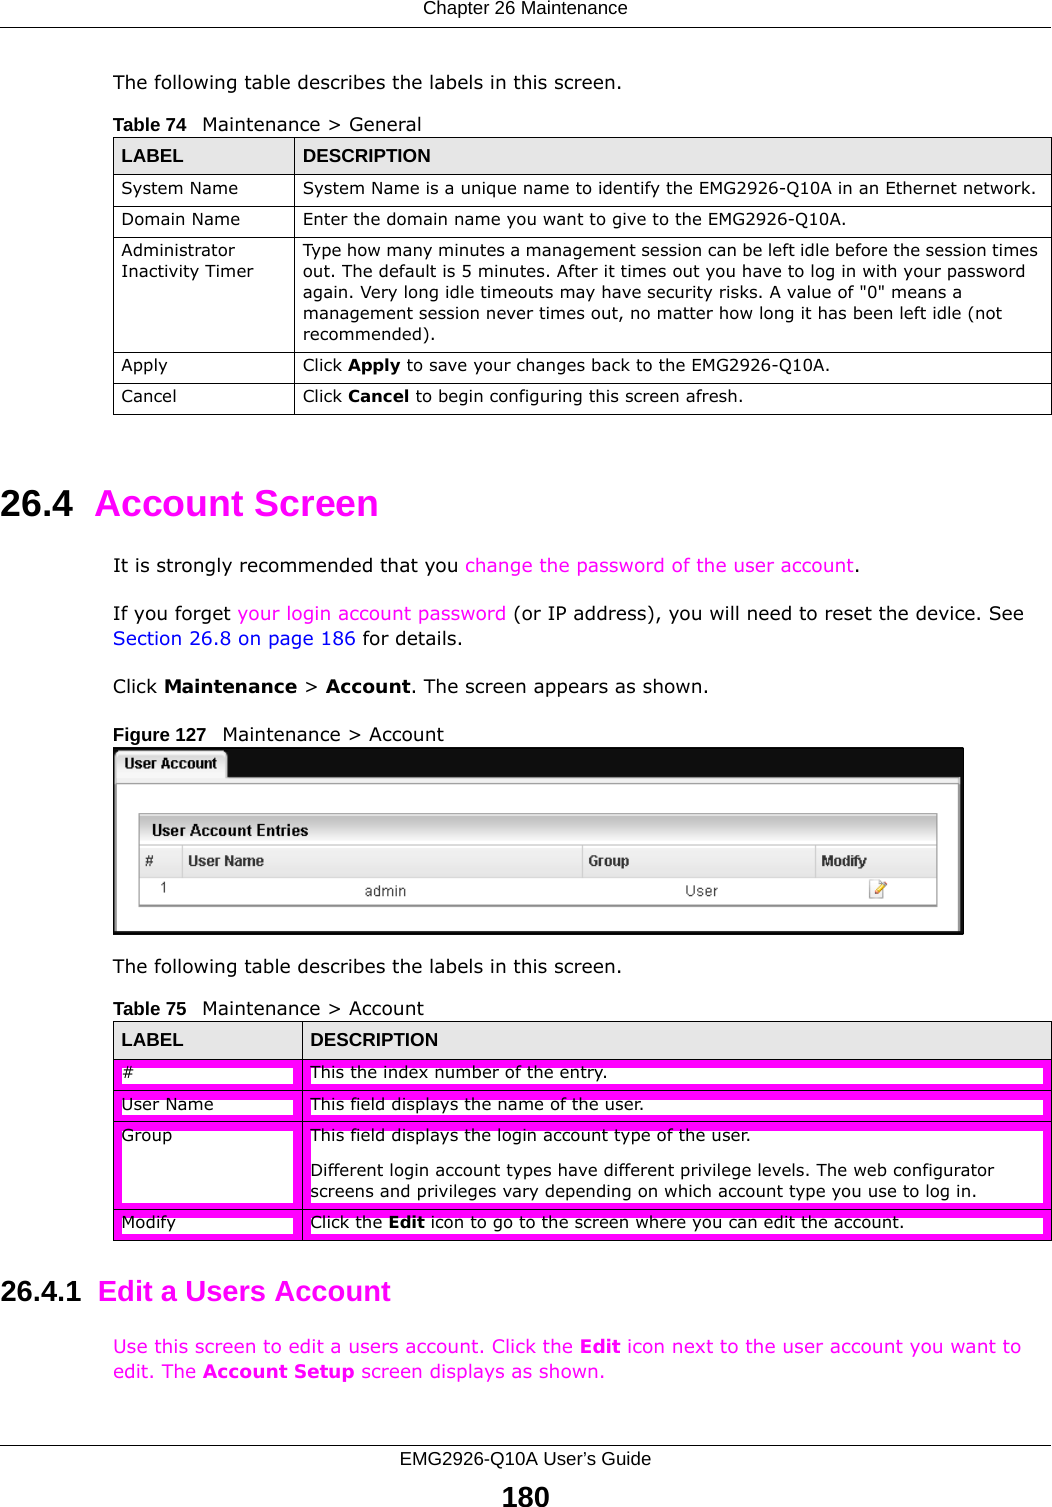 Chapter 26 MaintenanceEMG2926-Q10A User’s Guide180The following table describes the labels in this screen.26.4  Account ScreenIt is strongly recommended that you change the password of the user account. If you forget your login account password (or IP address), you will need to reset the device. See Section 26.8 on page 186 for details.Click Maintenance &gt; Account. The screen appears as shown.Figure 127   Maintenance &gt; Account The following table describes the labels in this screen.26.4.1  Edit a Users Account  Use this screen to edit a users account. Click the Edit icon next to the user account you want to edit. The Account Setup screen displays as shown.Table 74   Maintenance &gt; GeneralLABEL DESCRIPTIONSystem Name System Name is a unique name to identify the EMG2926-Q10A in an Ethernet network.Domain Name Enter the domain name you want to give to the EMG2926-Q10A.Administrator Inactivity TimerType how many minutes a management session can be left idle before the session times out. The default is 5 minutes. After it times out you have to log in with your password again. Very long idle timeouts may have security risks. A value of &quot;0&quot; means a management session never times out, no matter how long it has been left idle (not recommended).Apply Click Apply to save your changes back to the EMG2926-Q10A.Cancel Click Cancel to begin configuring this screen afresh.Table 75   Maintenance &gt; AccountLABEL DESCRIPTION#This the index number of the entry.User Name This field displays the name of the user.Group This field displays the login account type of the user. Different login account types have different privilege levels. The web configurator screens and privileges vary depending on which account type you use to log in.Modify Click the Edit icon to go to the screen where you can edit the account.